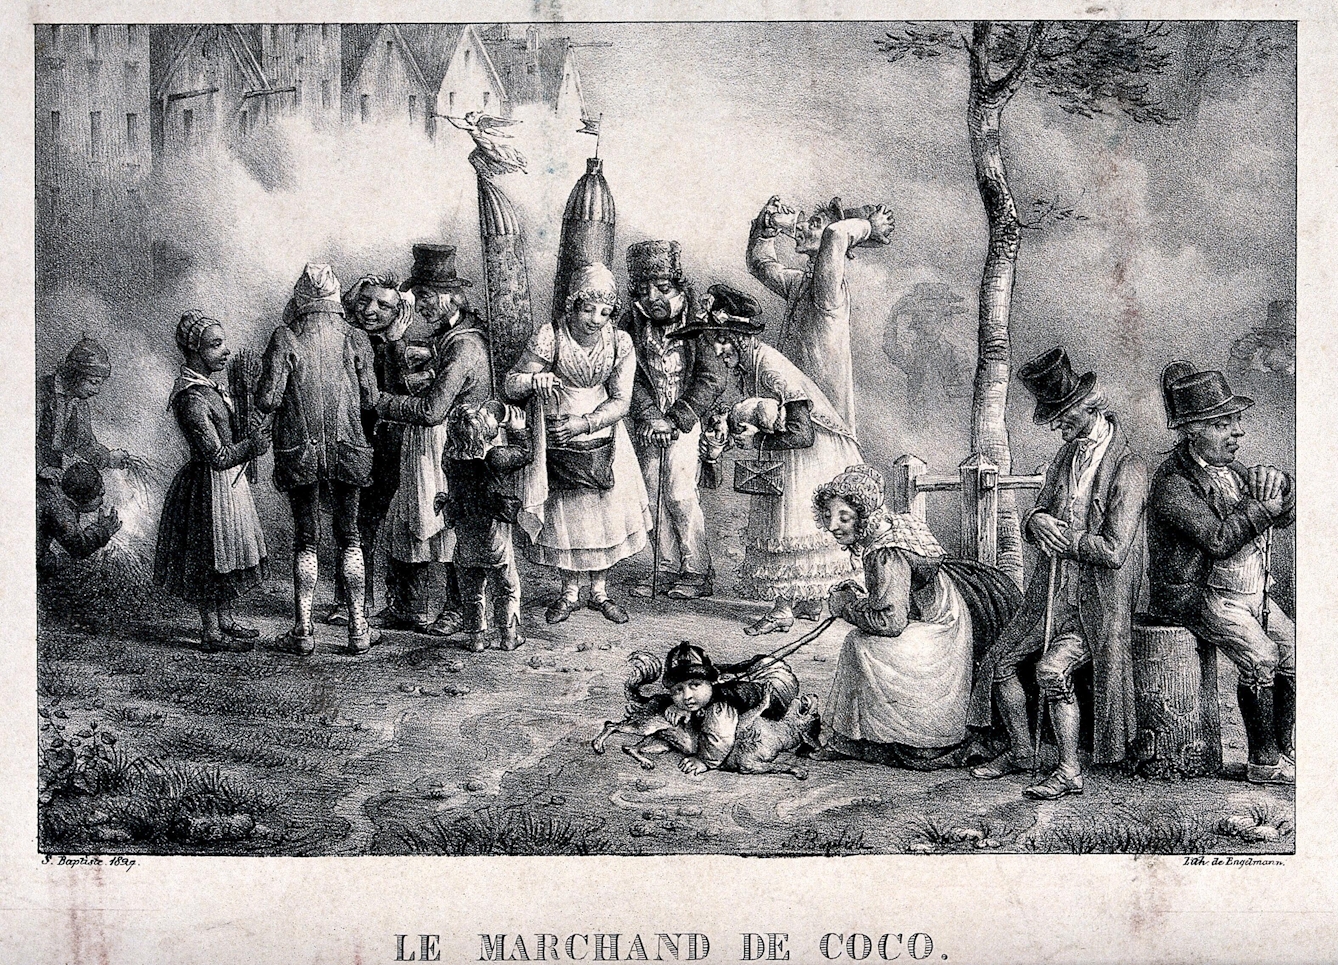 Black and white illustration showing people purchasing drinks from a cocoa vendor as others sit resting under a tree in fog. They appear to be mostly working class in dress, though they are not shabby or dirty. 